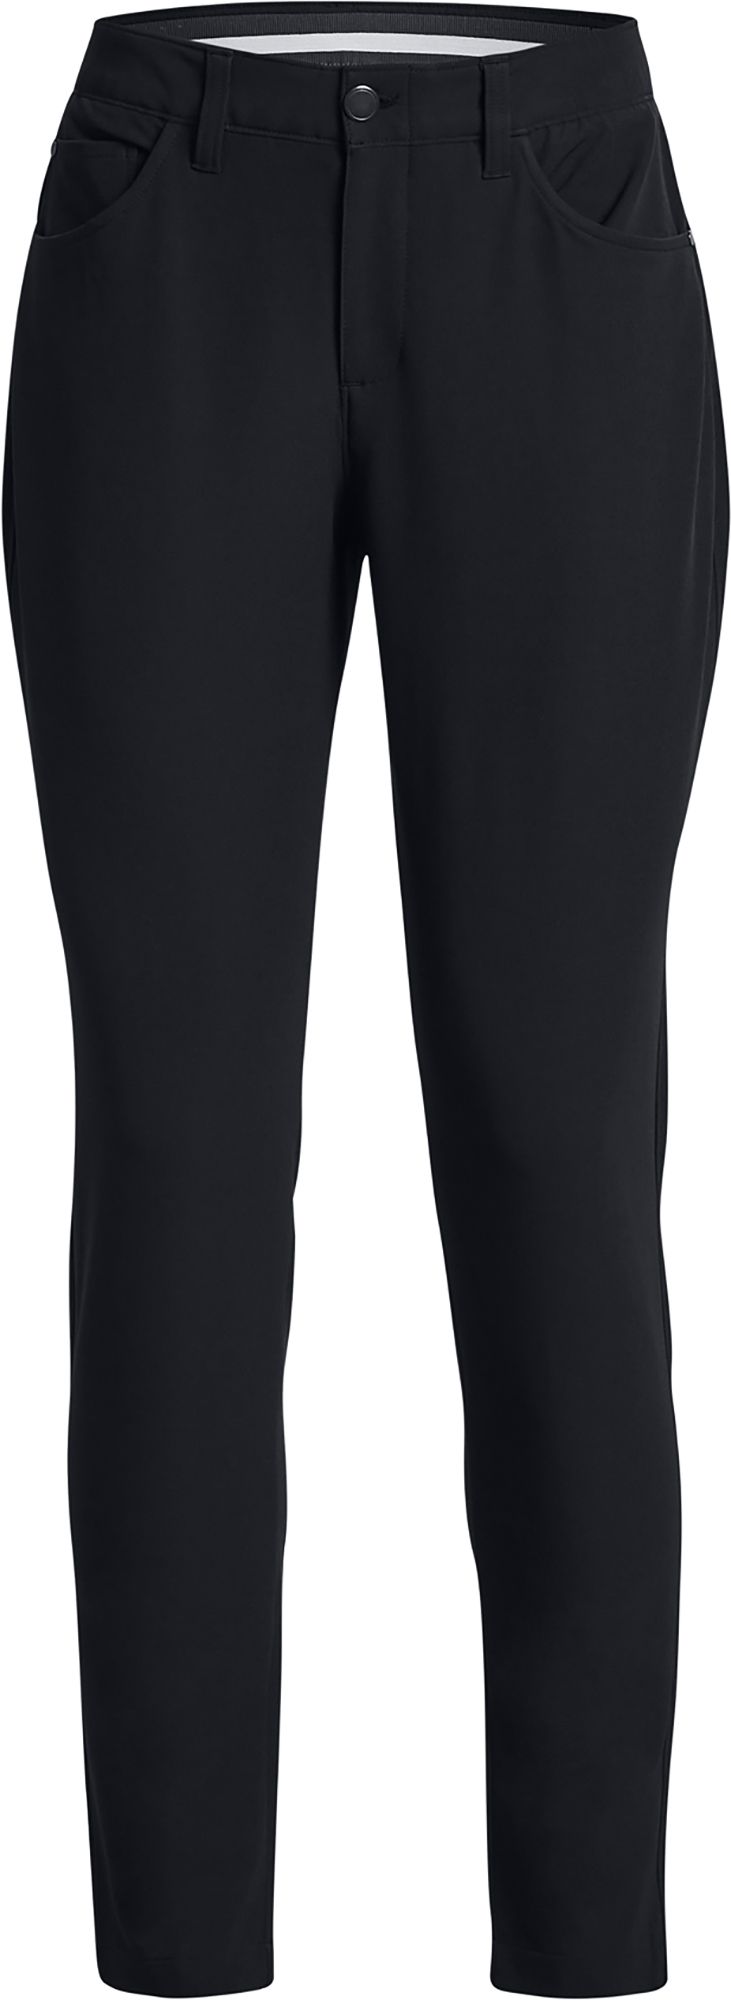 Under Armour Womens Links ColdGear Infrared 5-Pocket Pants